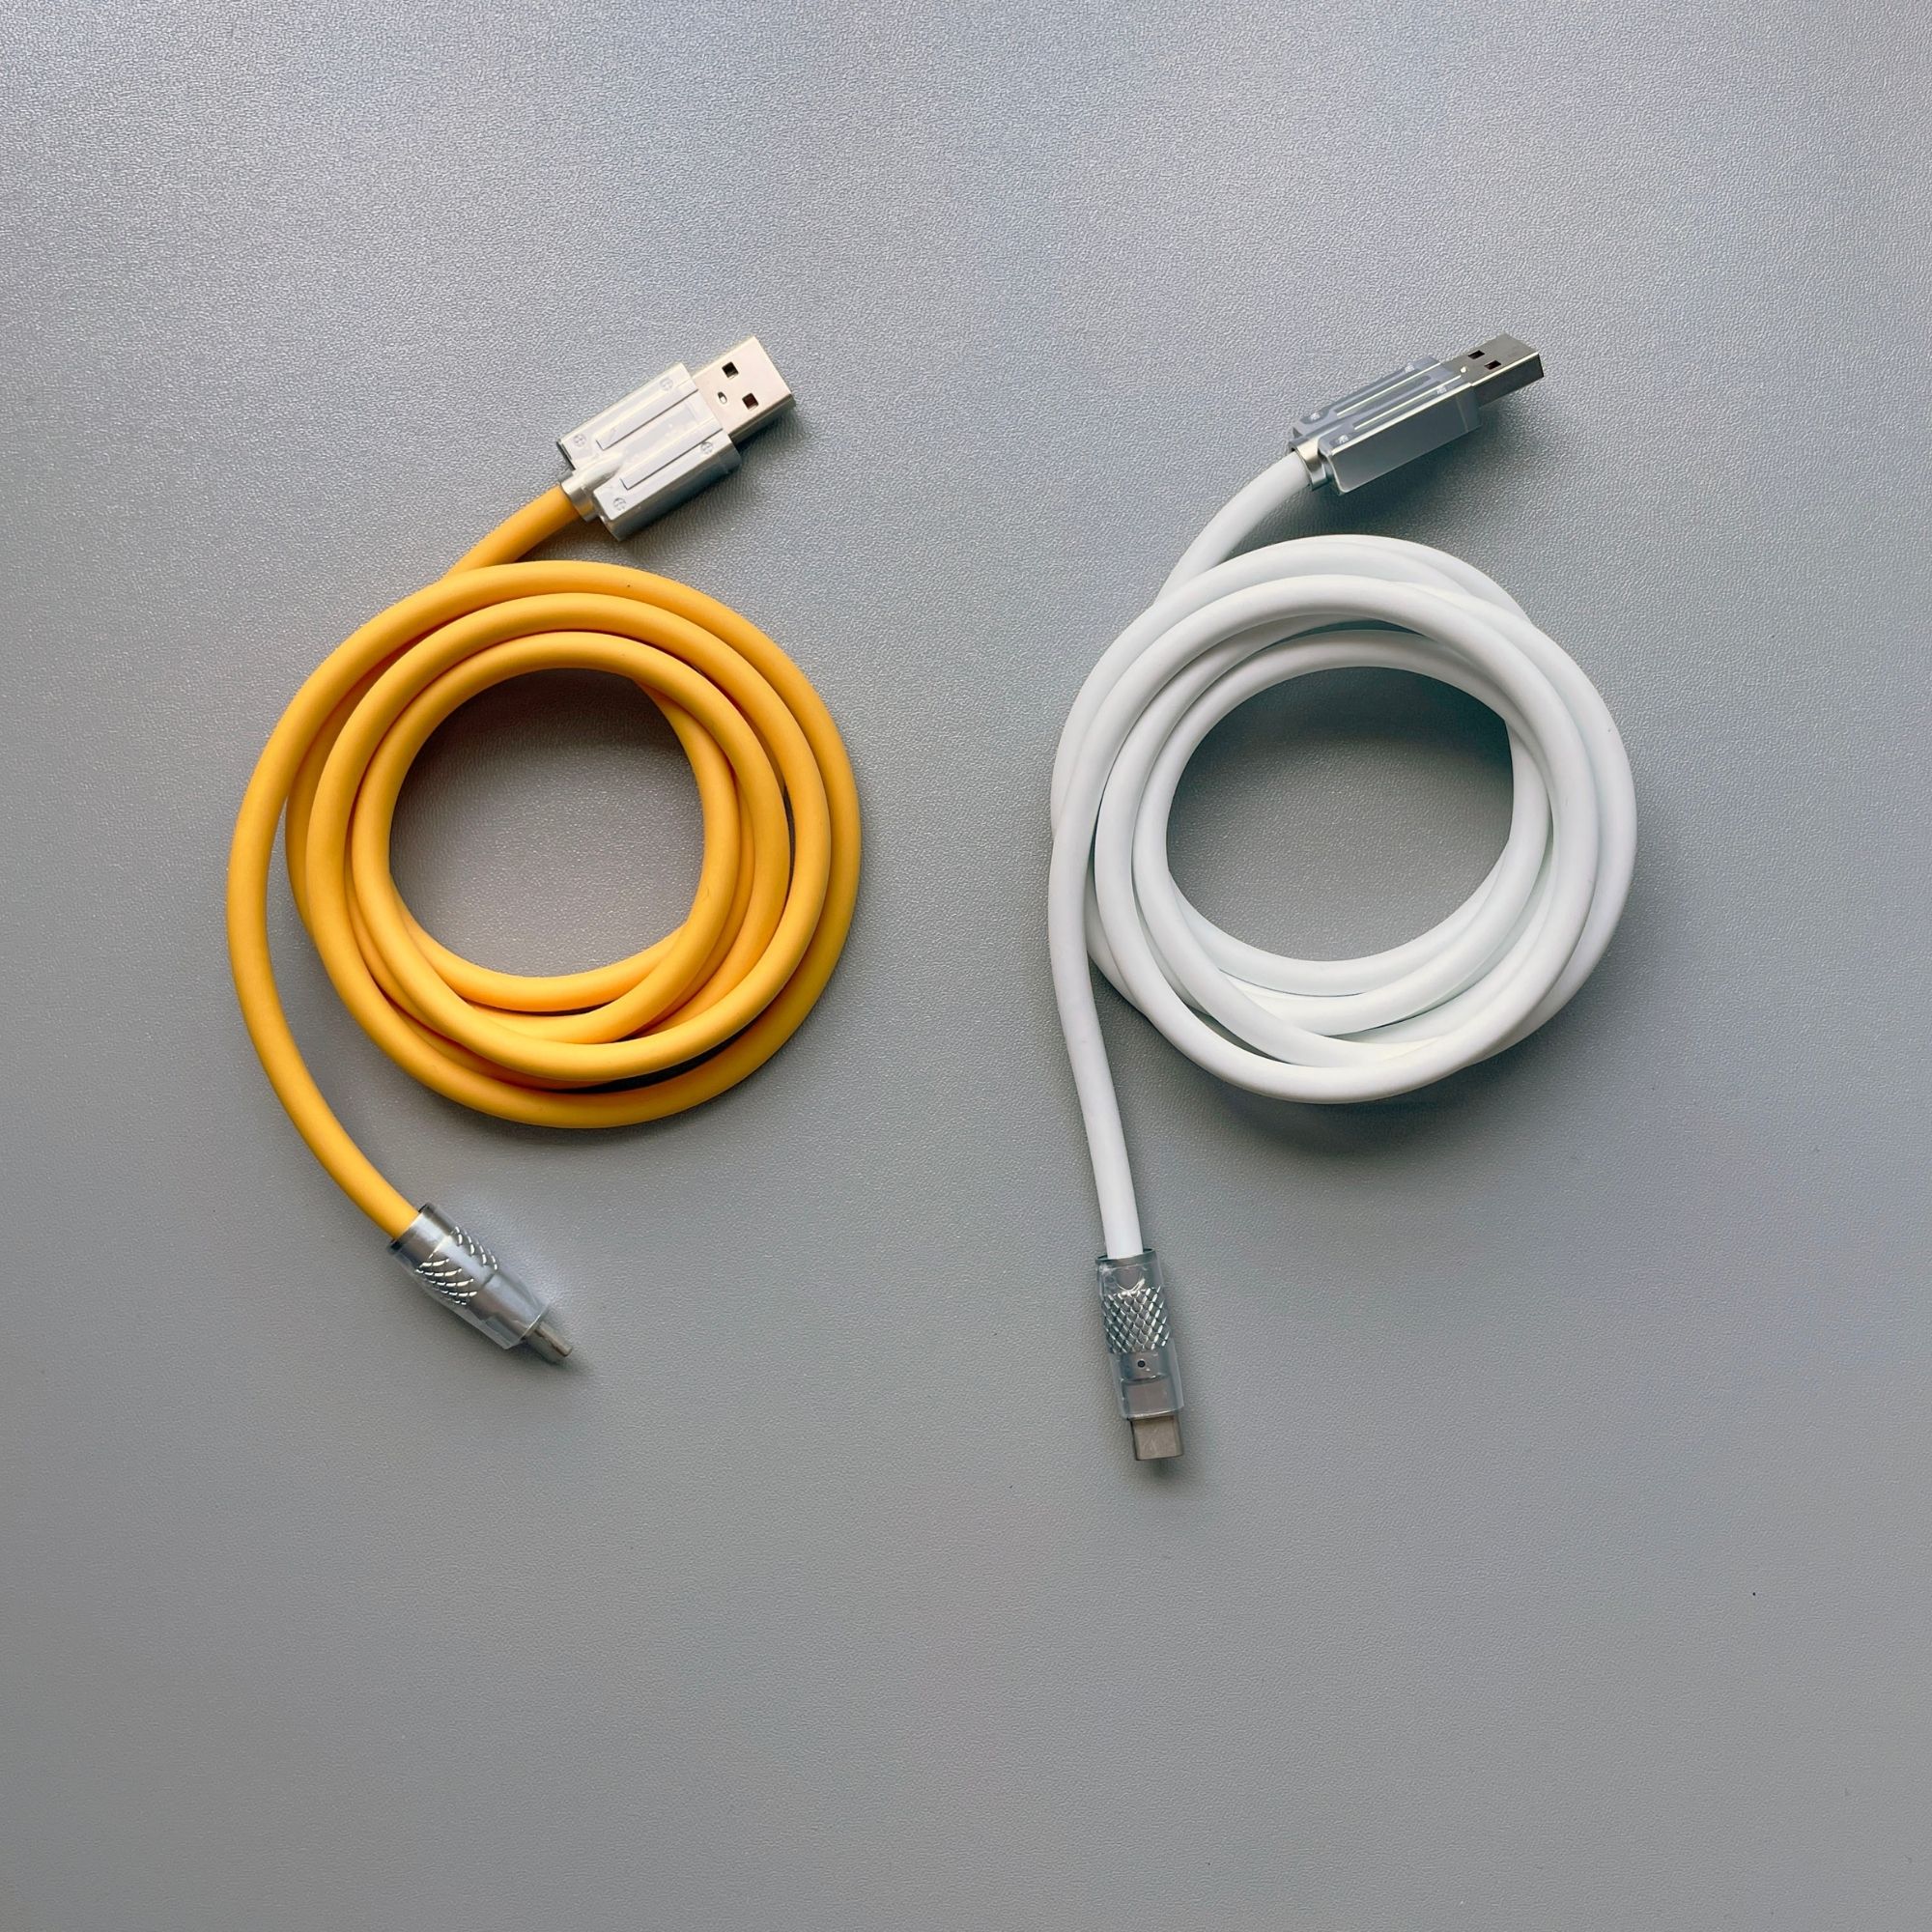 USB-C data cable for split keyboard